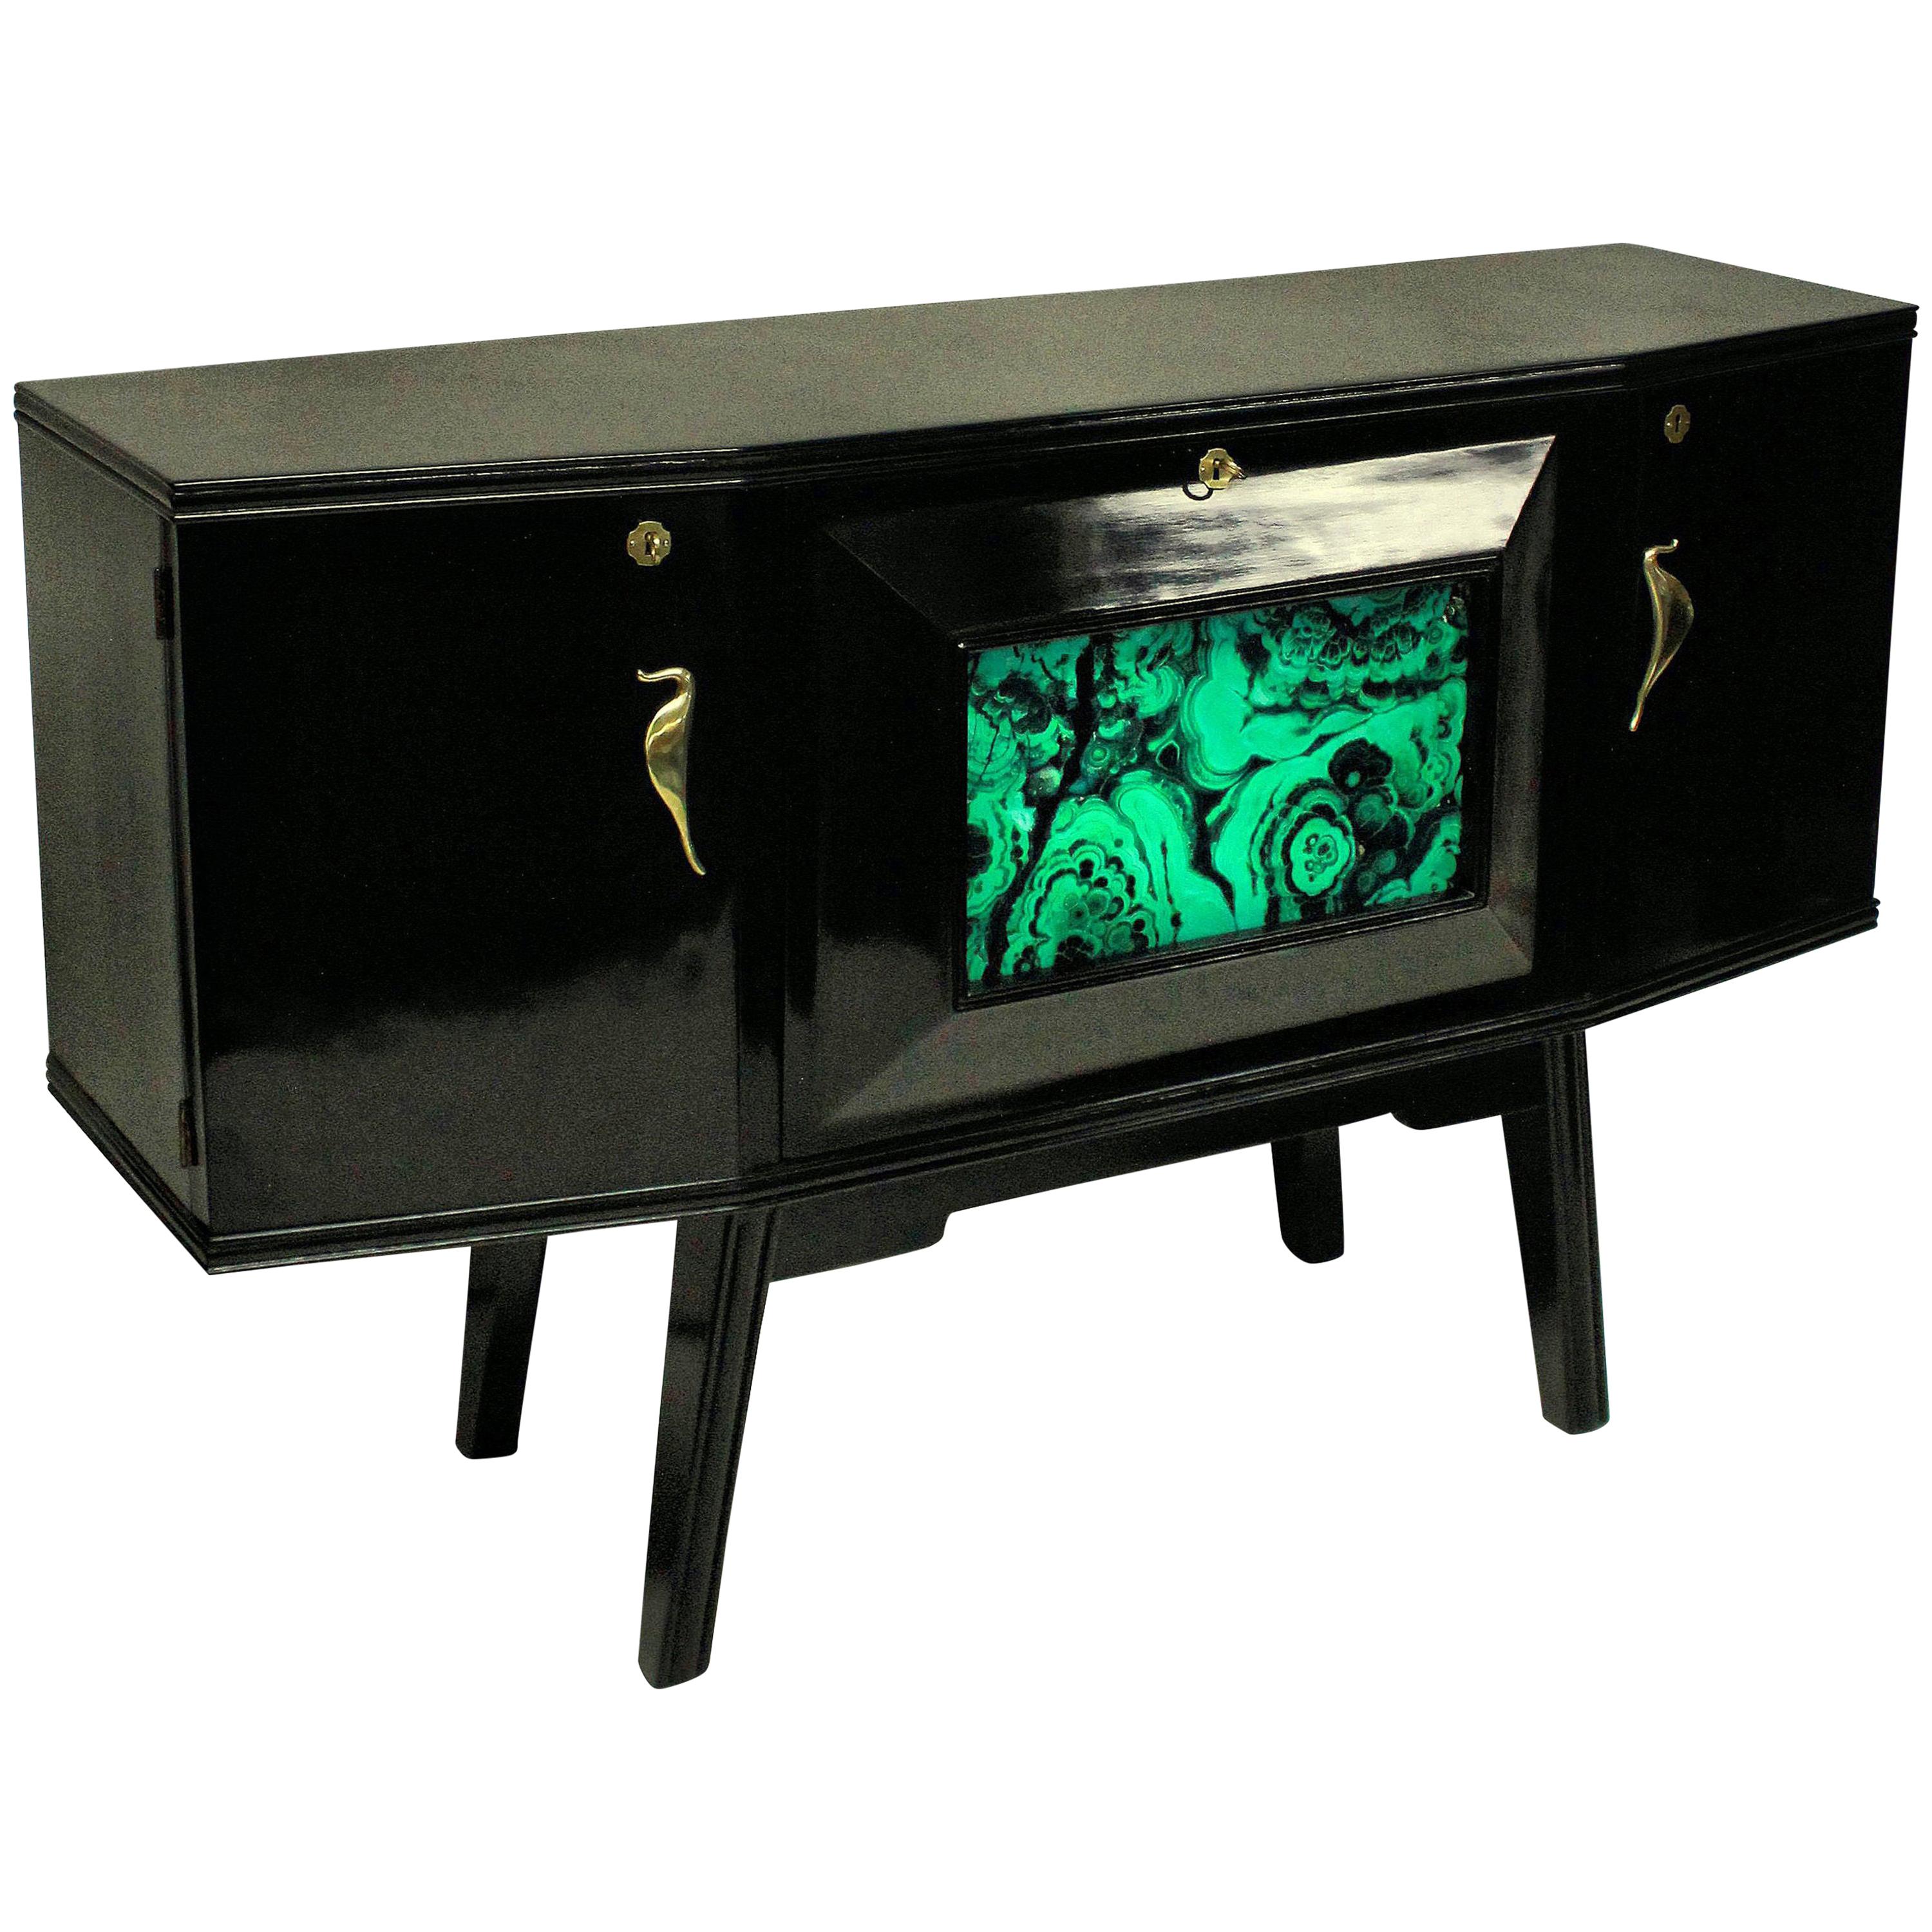 Italian Midcentury Black Lacquered Credenza with Bar